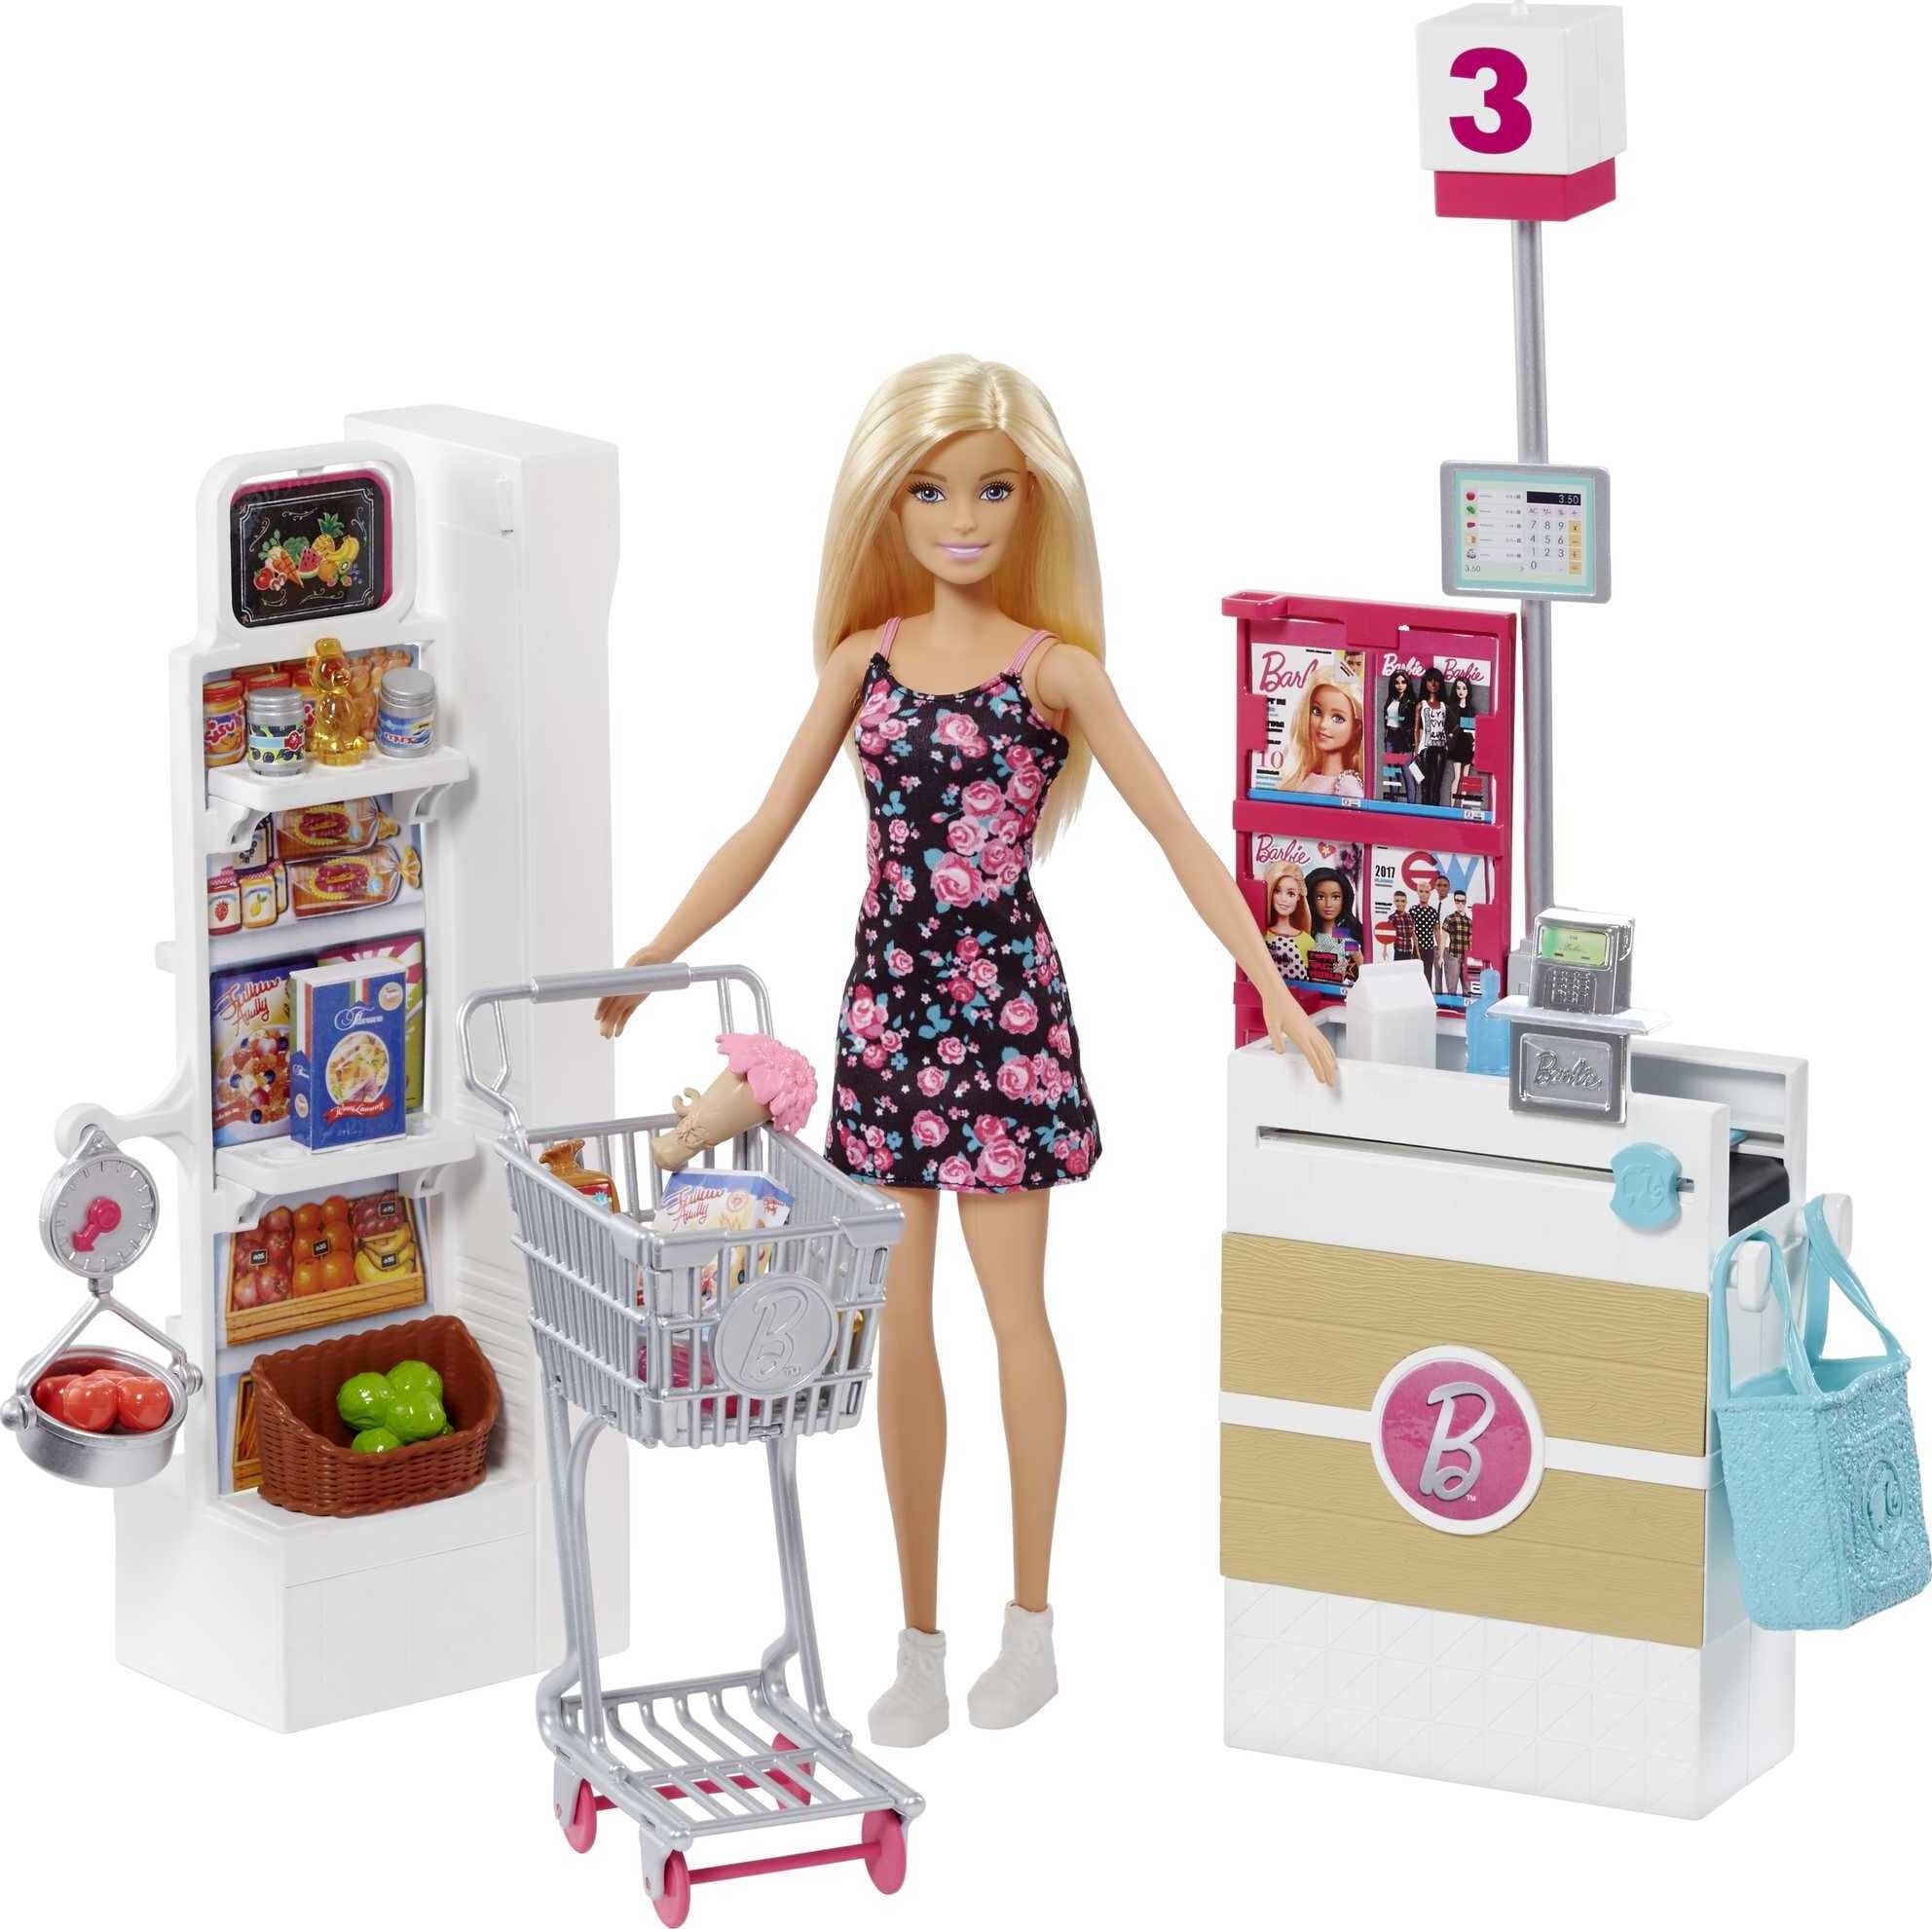 Barbie Doll and Supermarket Playset with 25 Grocery Store and Food-Themed  Accessories